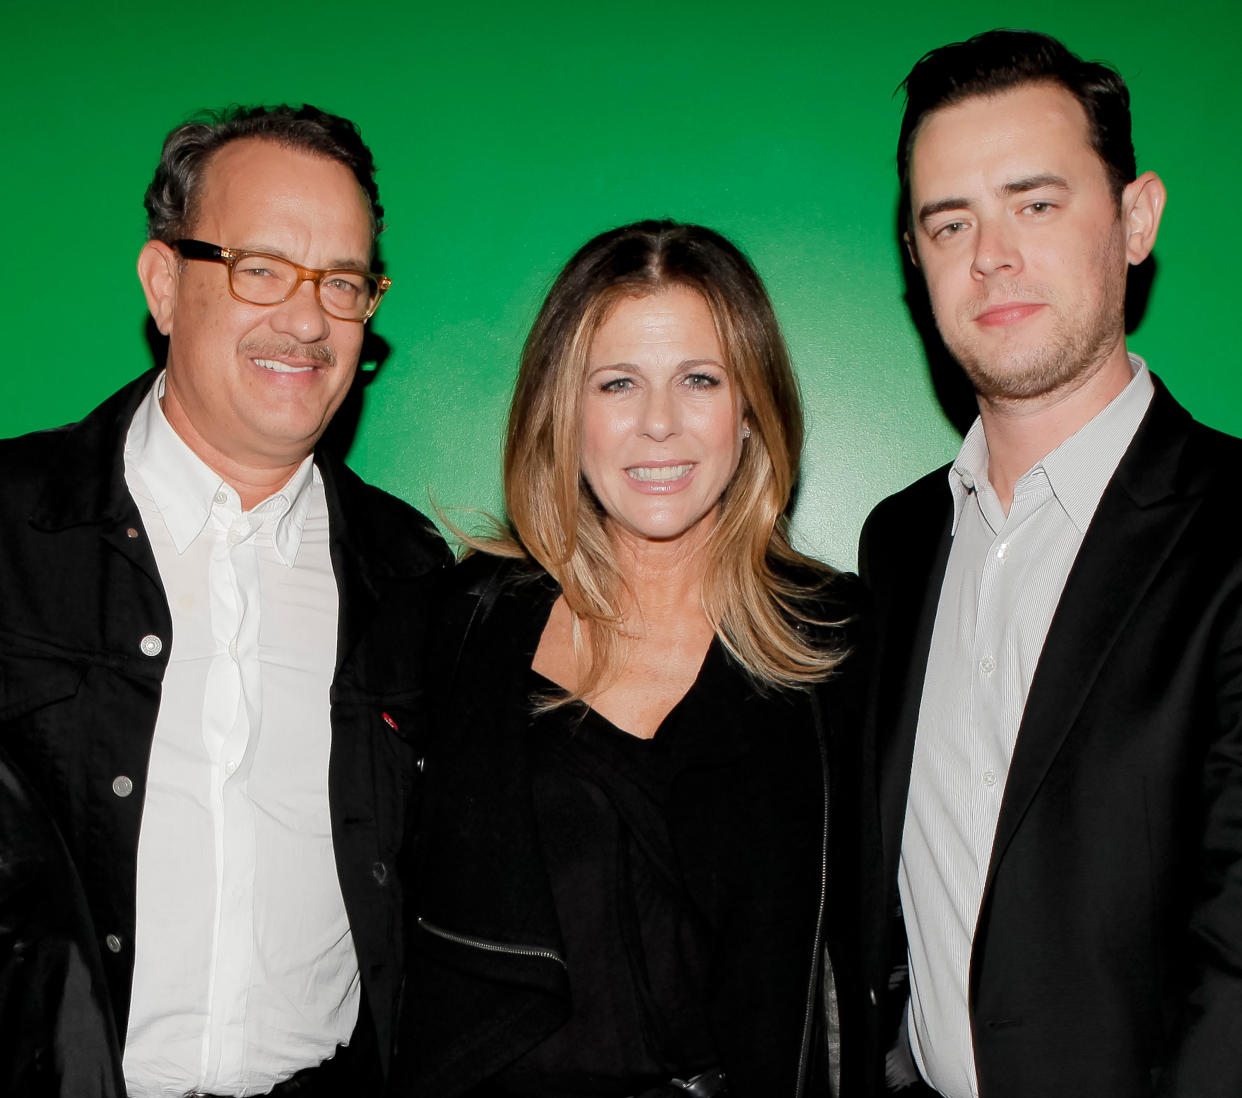 Colin Hanks says his daughters aren't interested in his and Tom Hanks's careers. (WireImage)